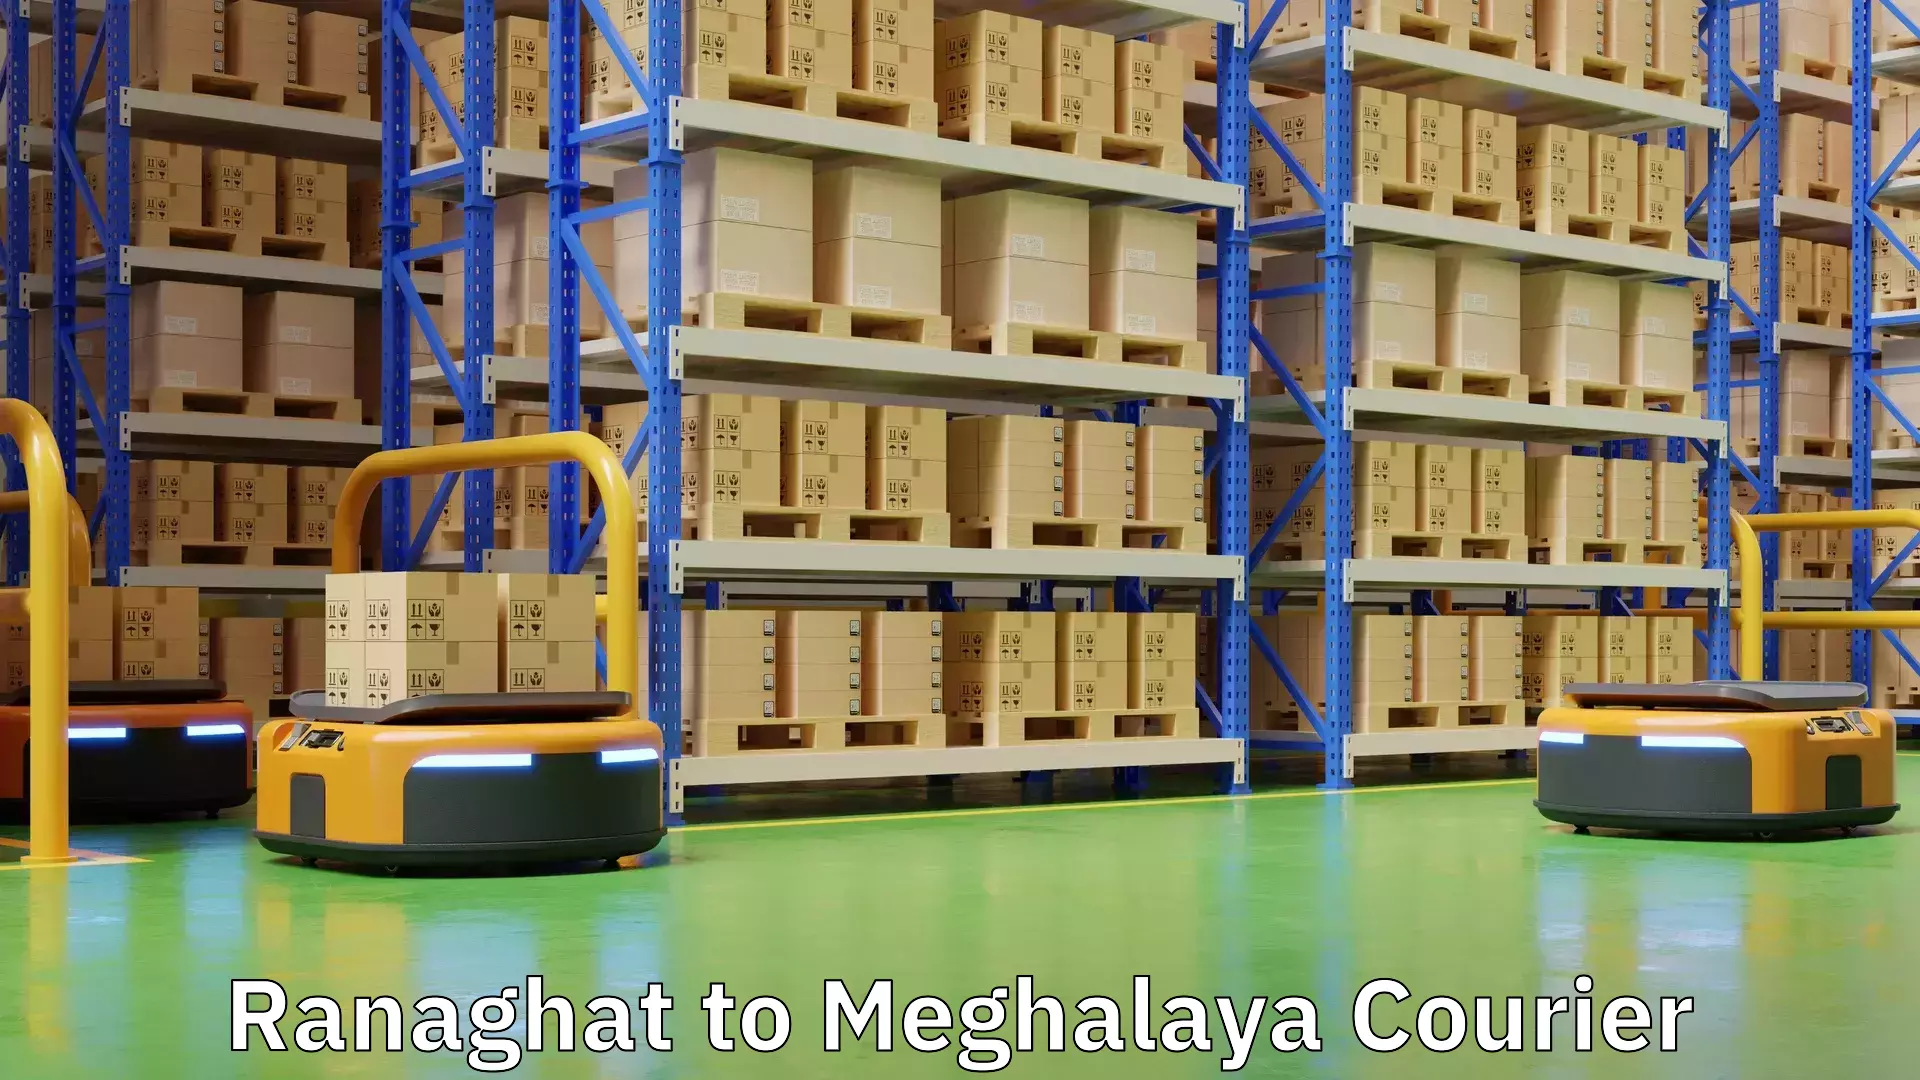 Reliable delivery network Ranaghat to Meghalaya